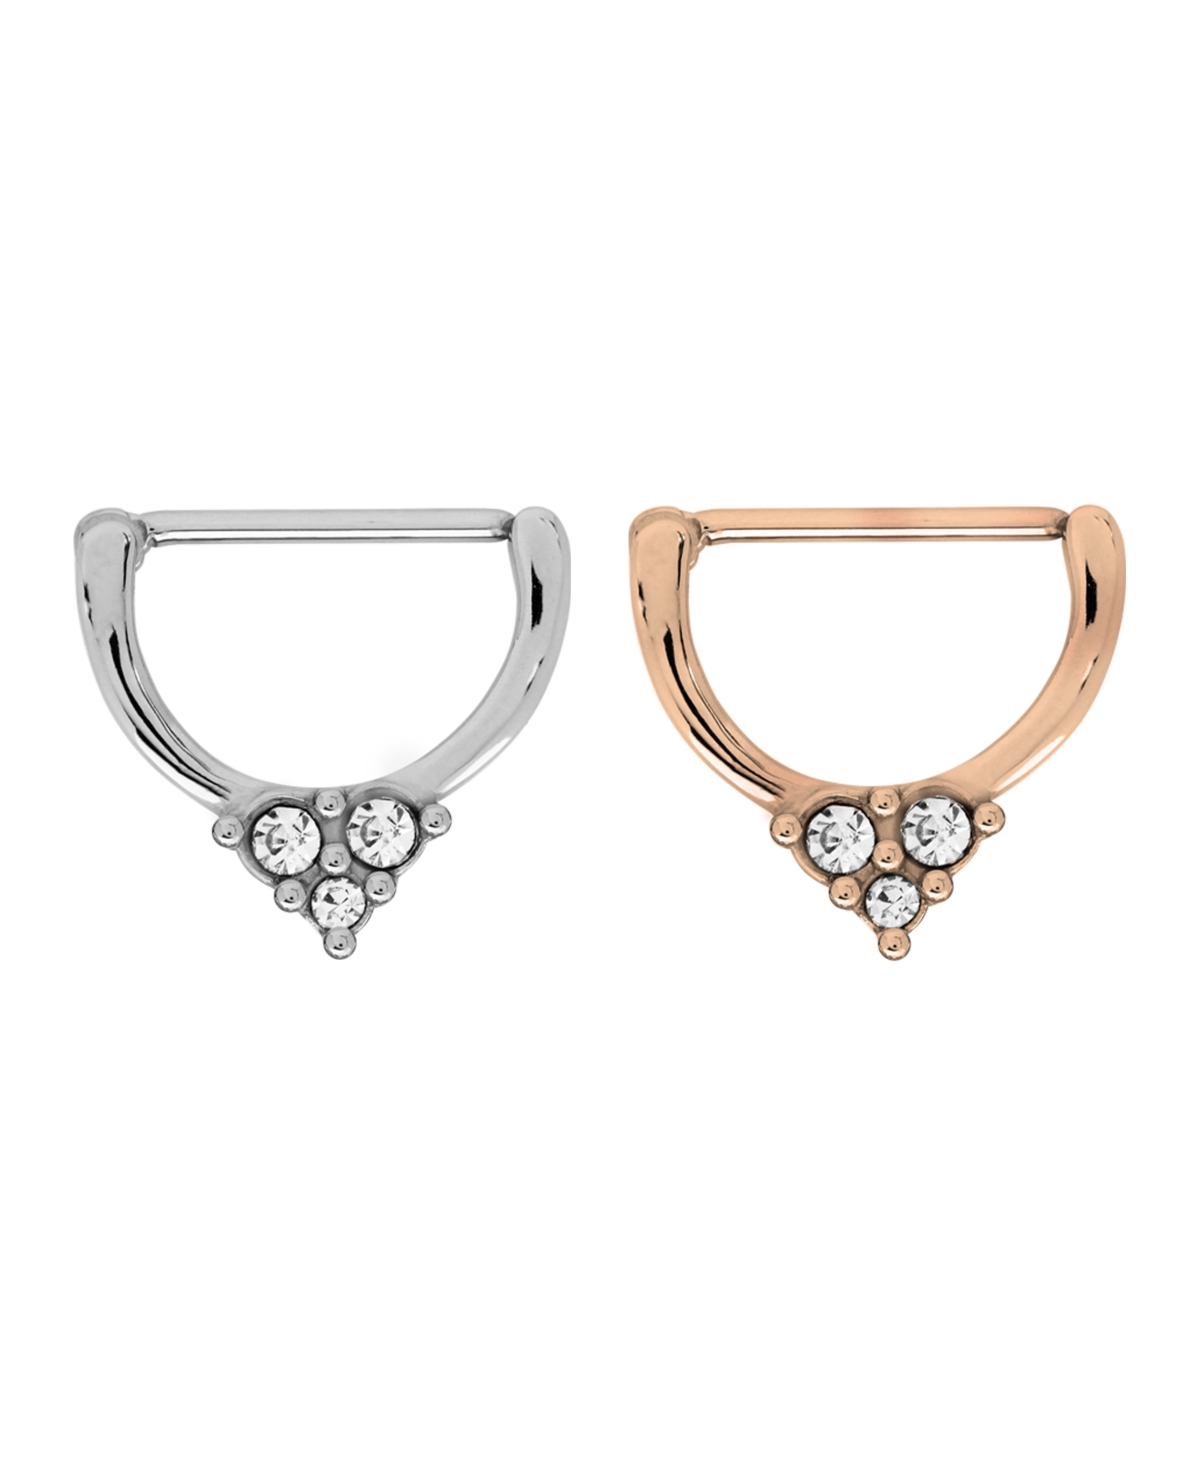 Bodifine Stainless Steel Set of 2 Colors Crystal Clicker Nipple Rings - Asstd